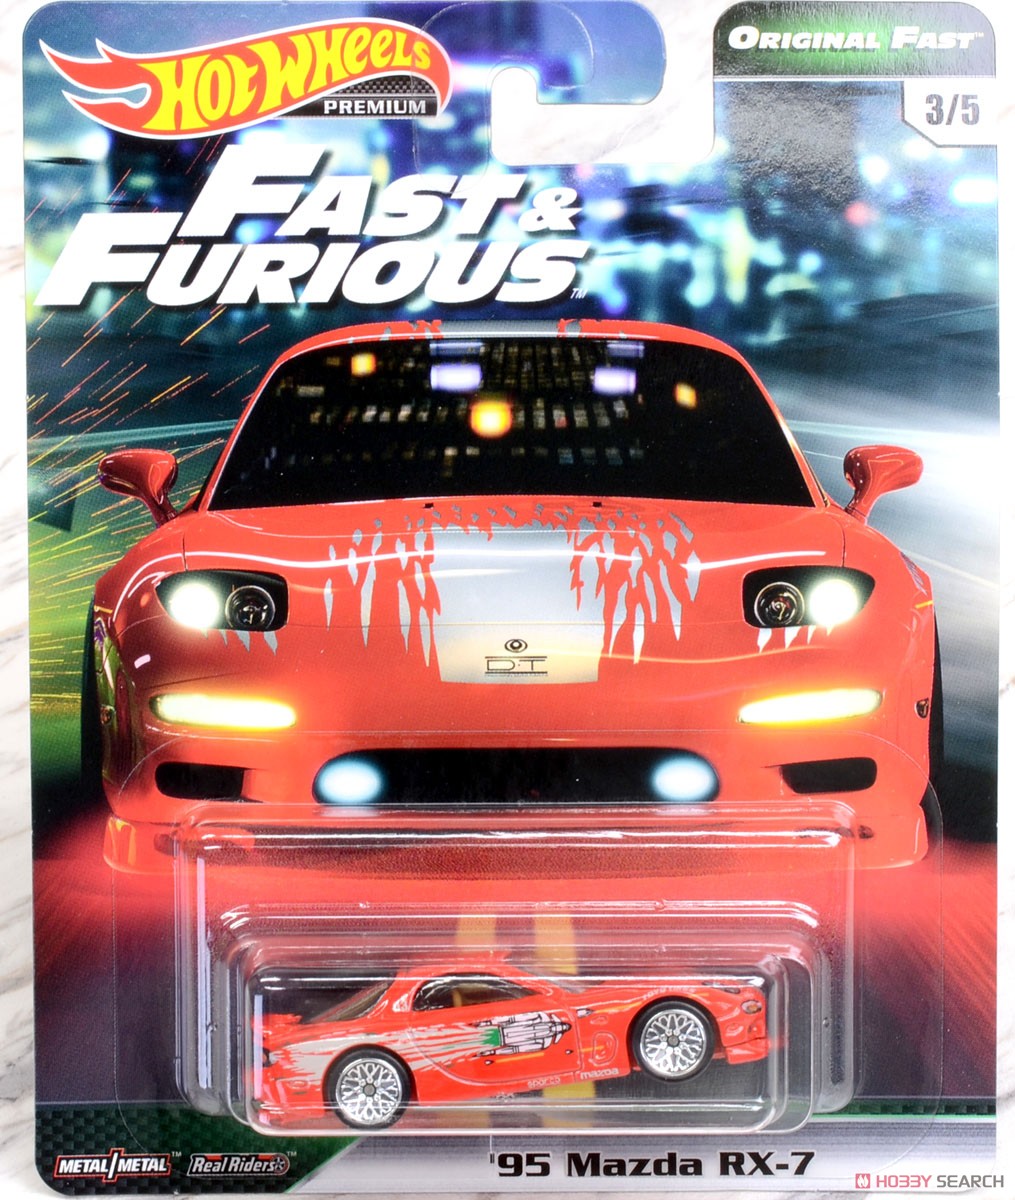 Hot Wheels The Fast and the Furious Premium Assorted Original Fast (10個入り) (玩具) パッケージ2